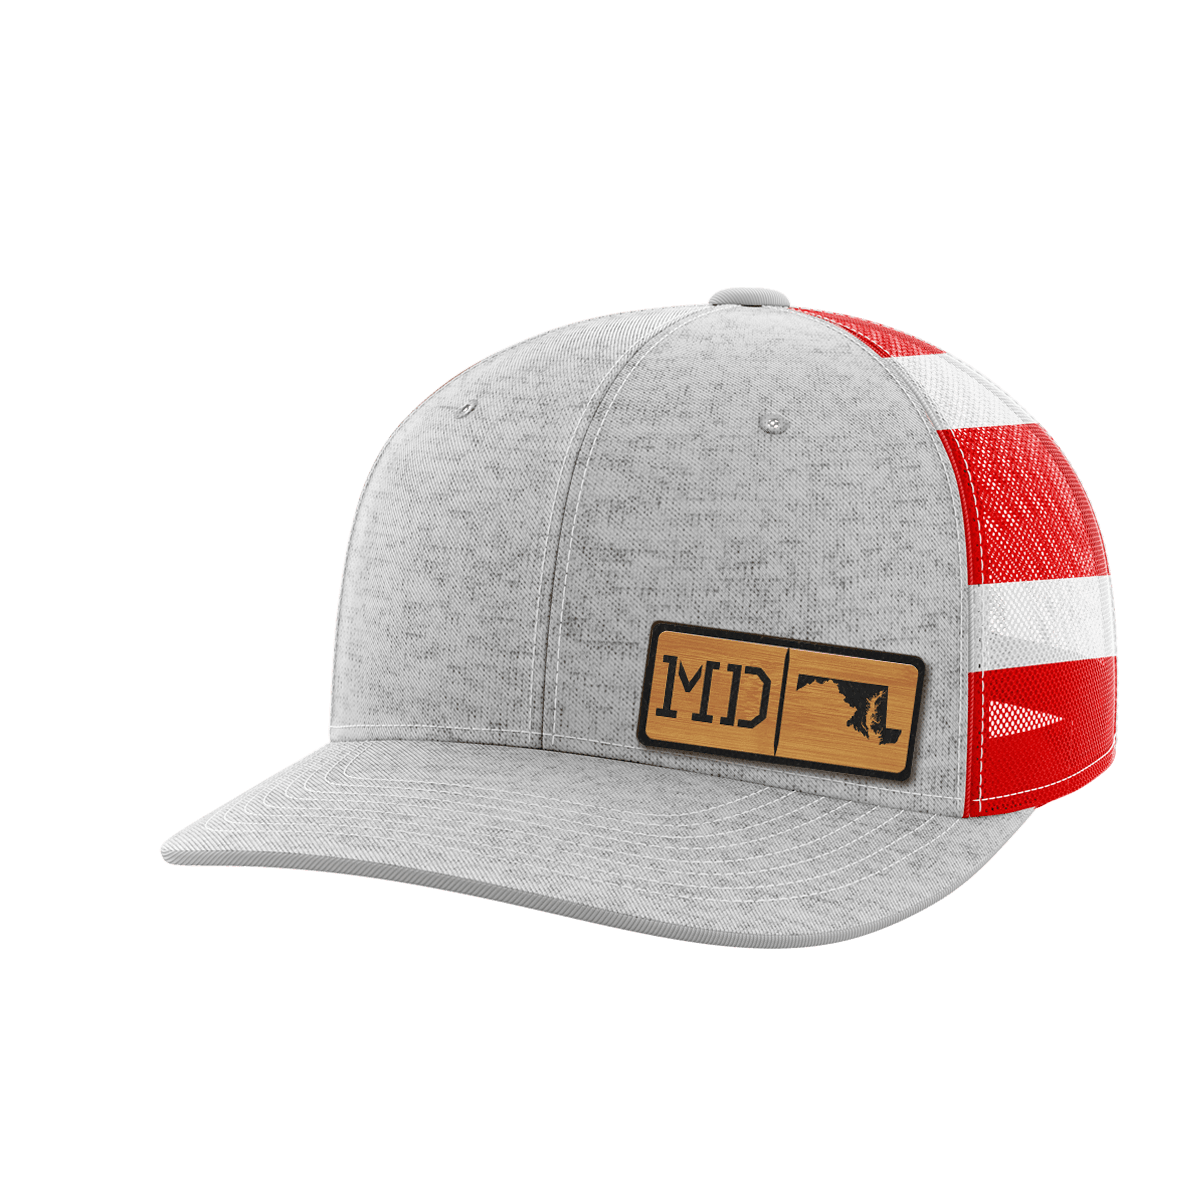 Thumbnail for Maryland Homegrown Hats - Greater Half